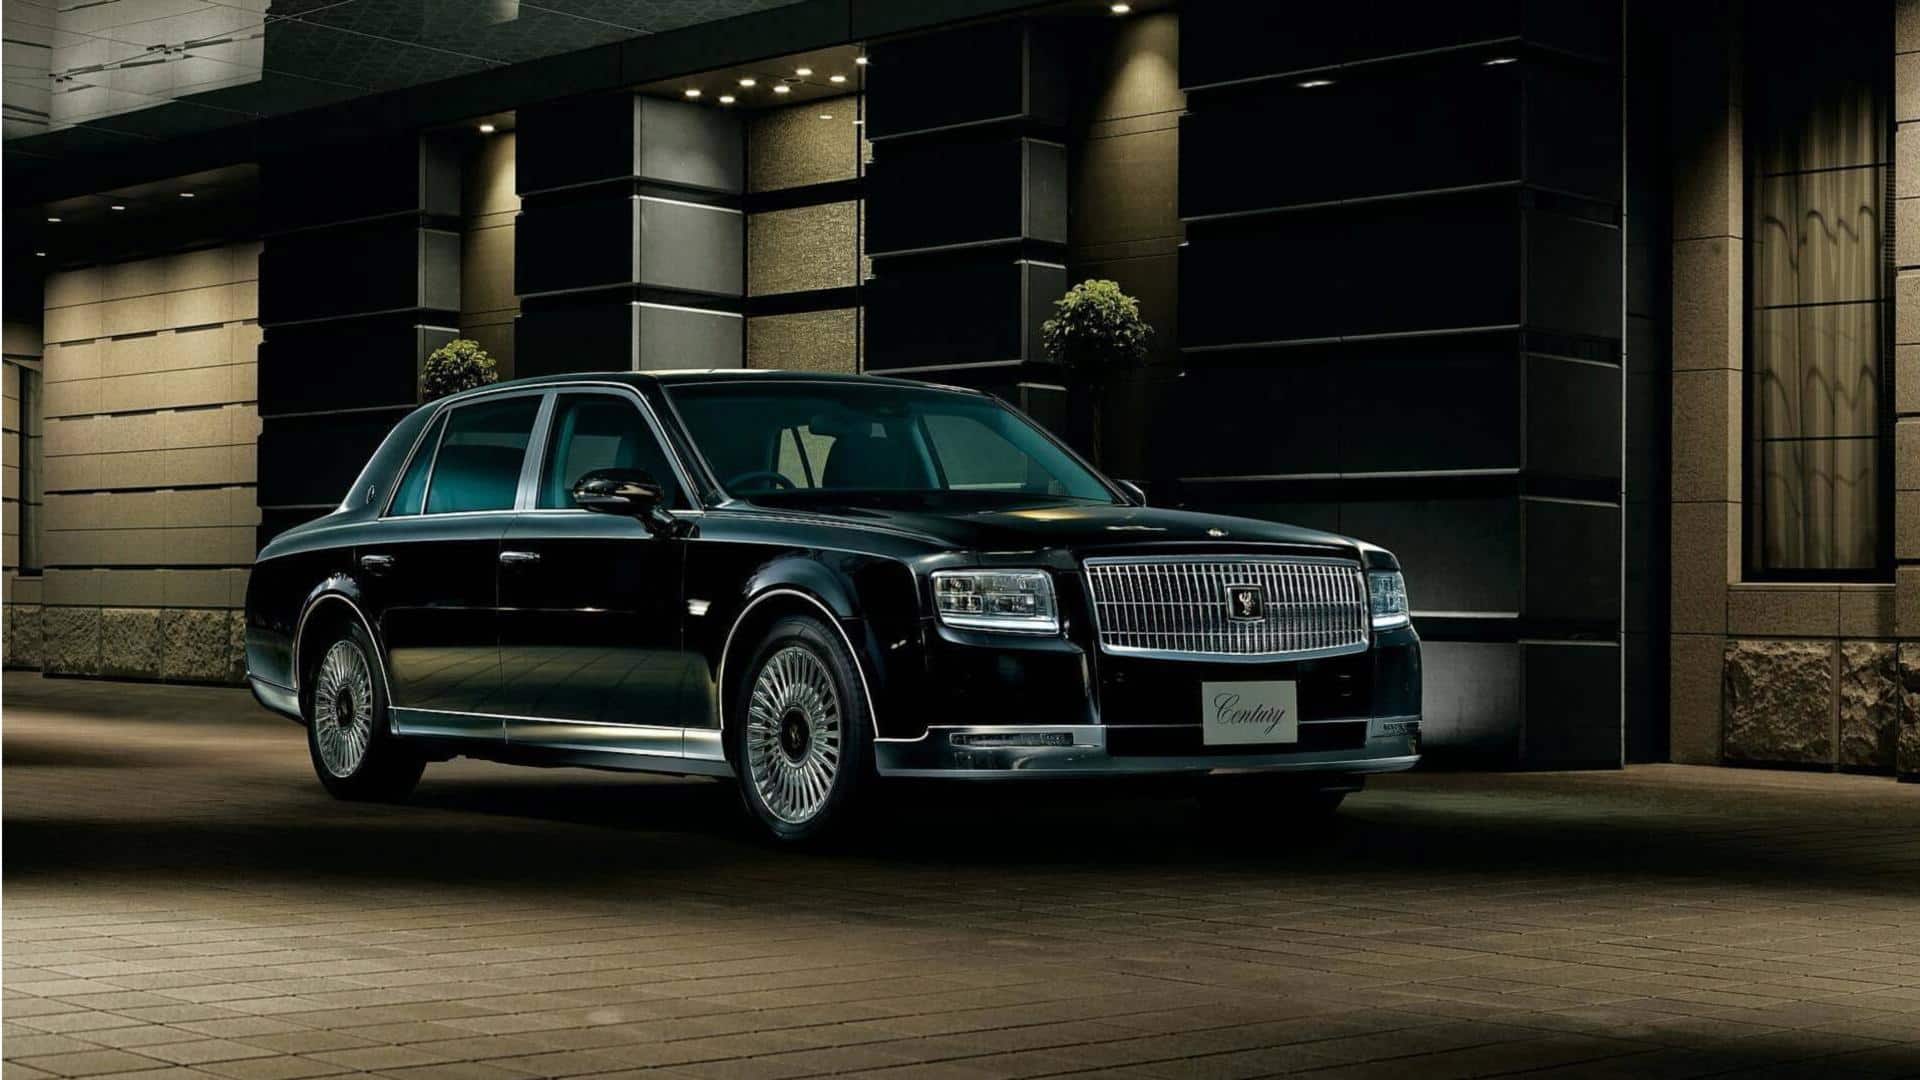 Toyota Century SUV to debut as brand's flagship offering